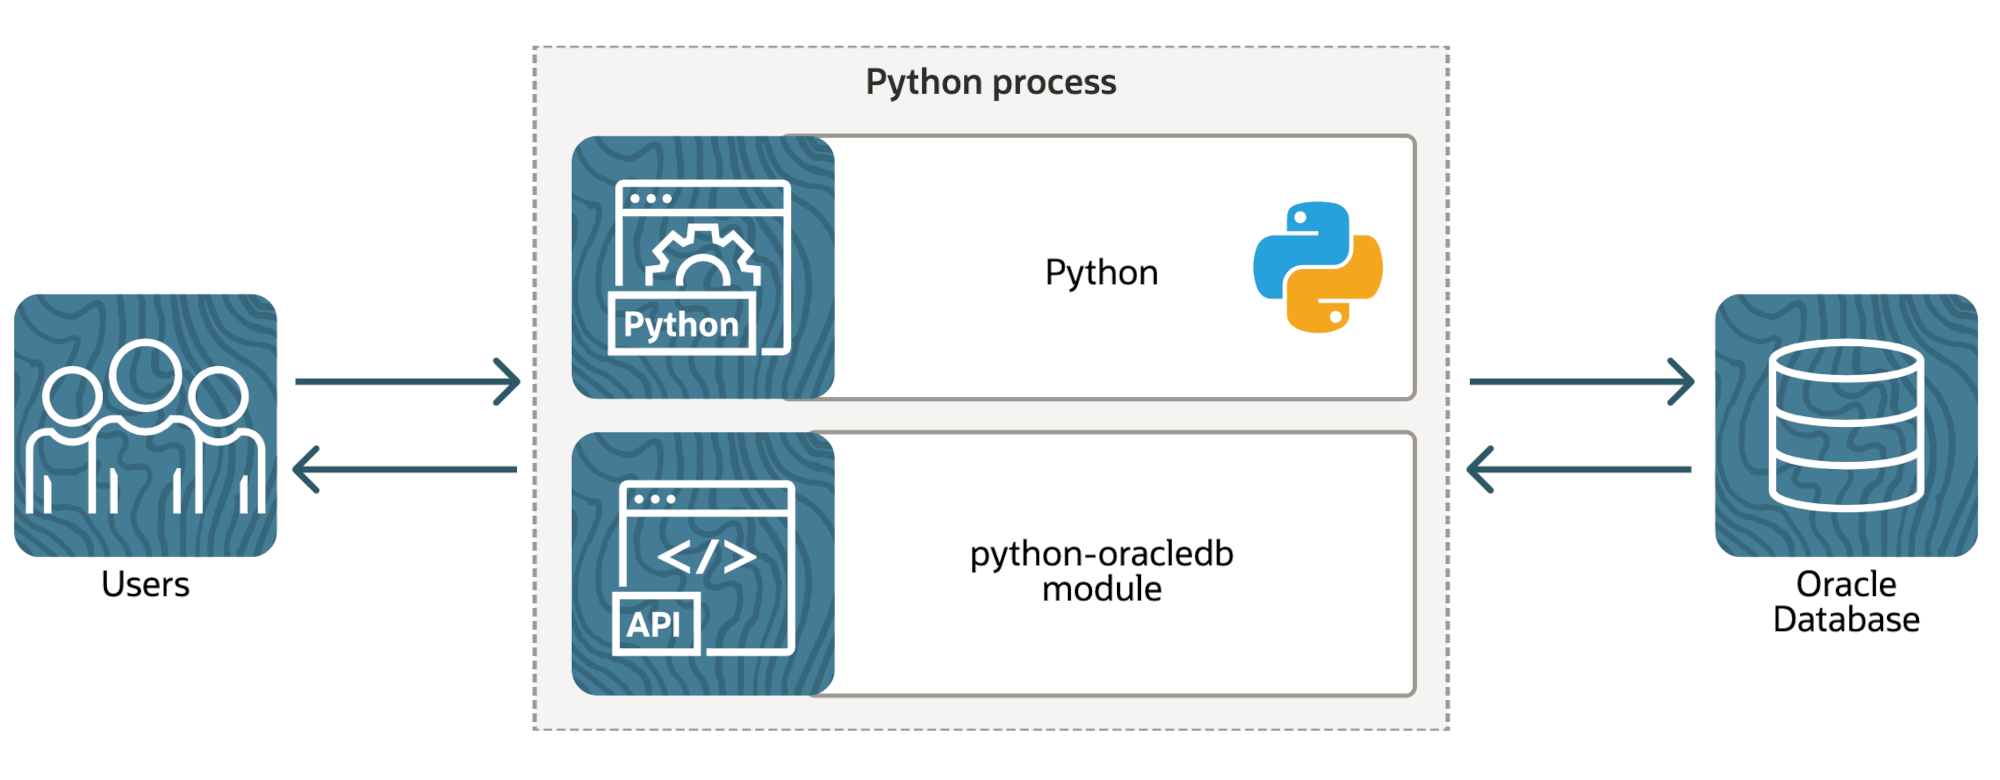 architecture of the python-oracledb driver in Thin mode